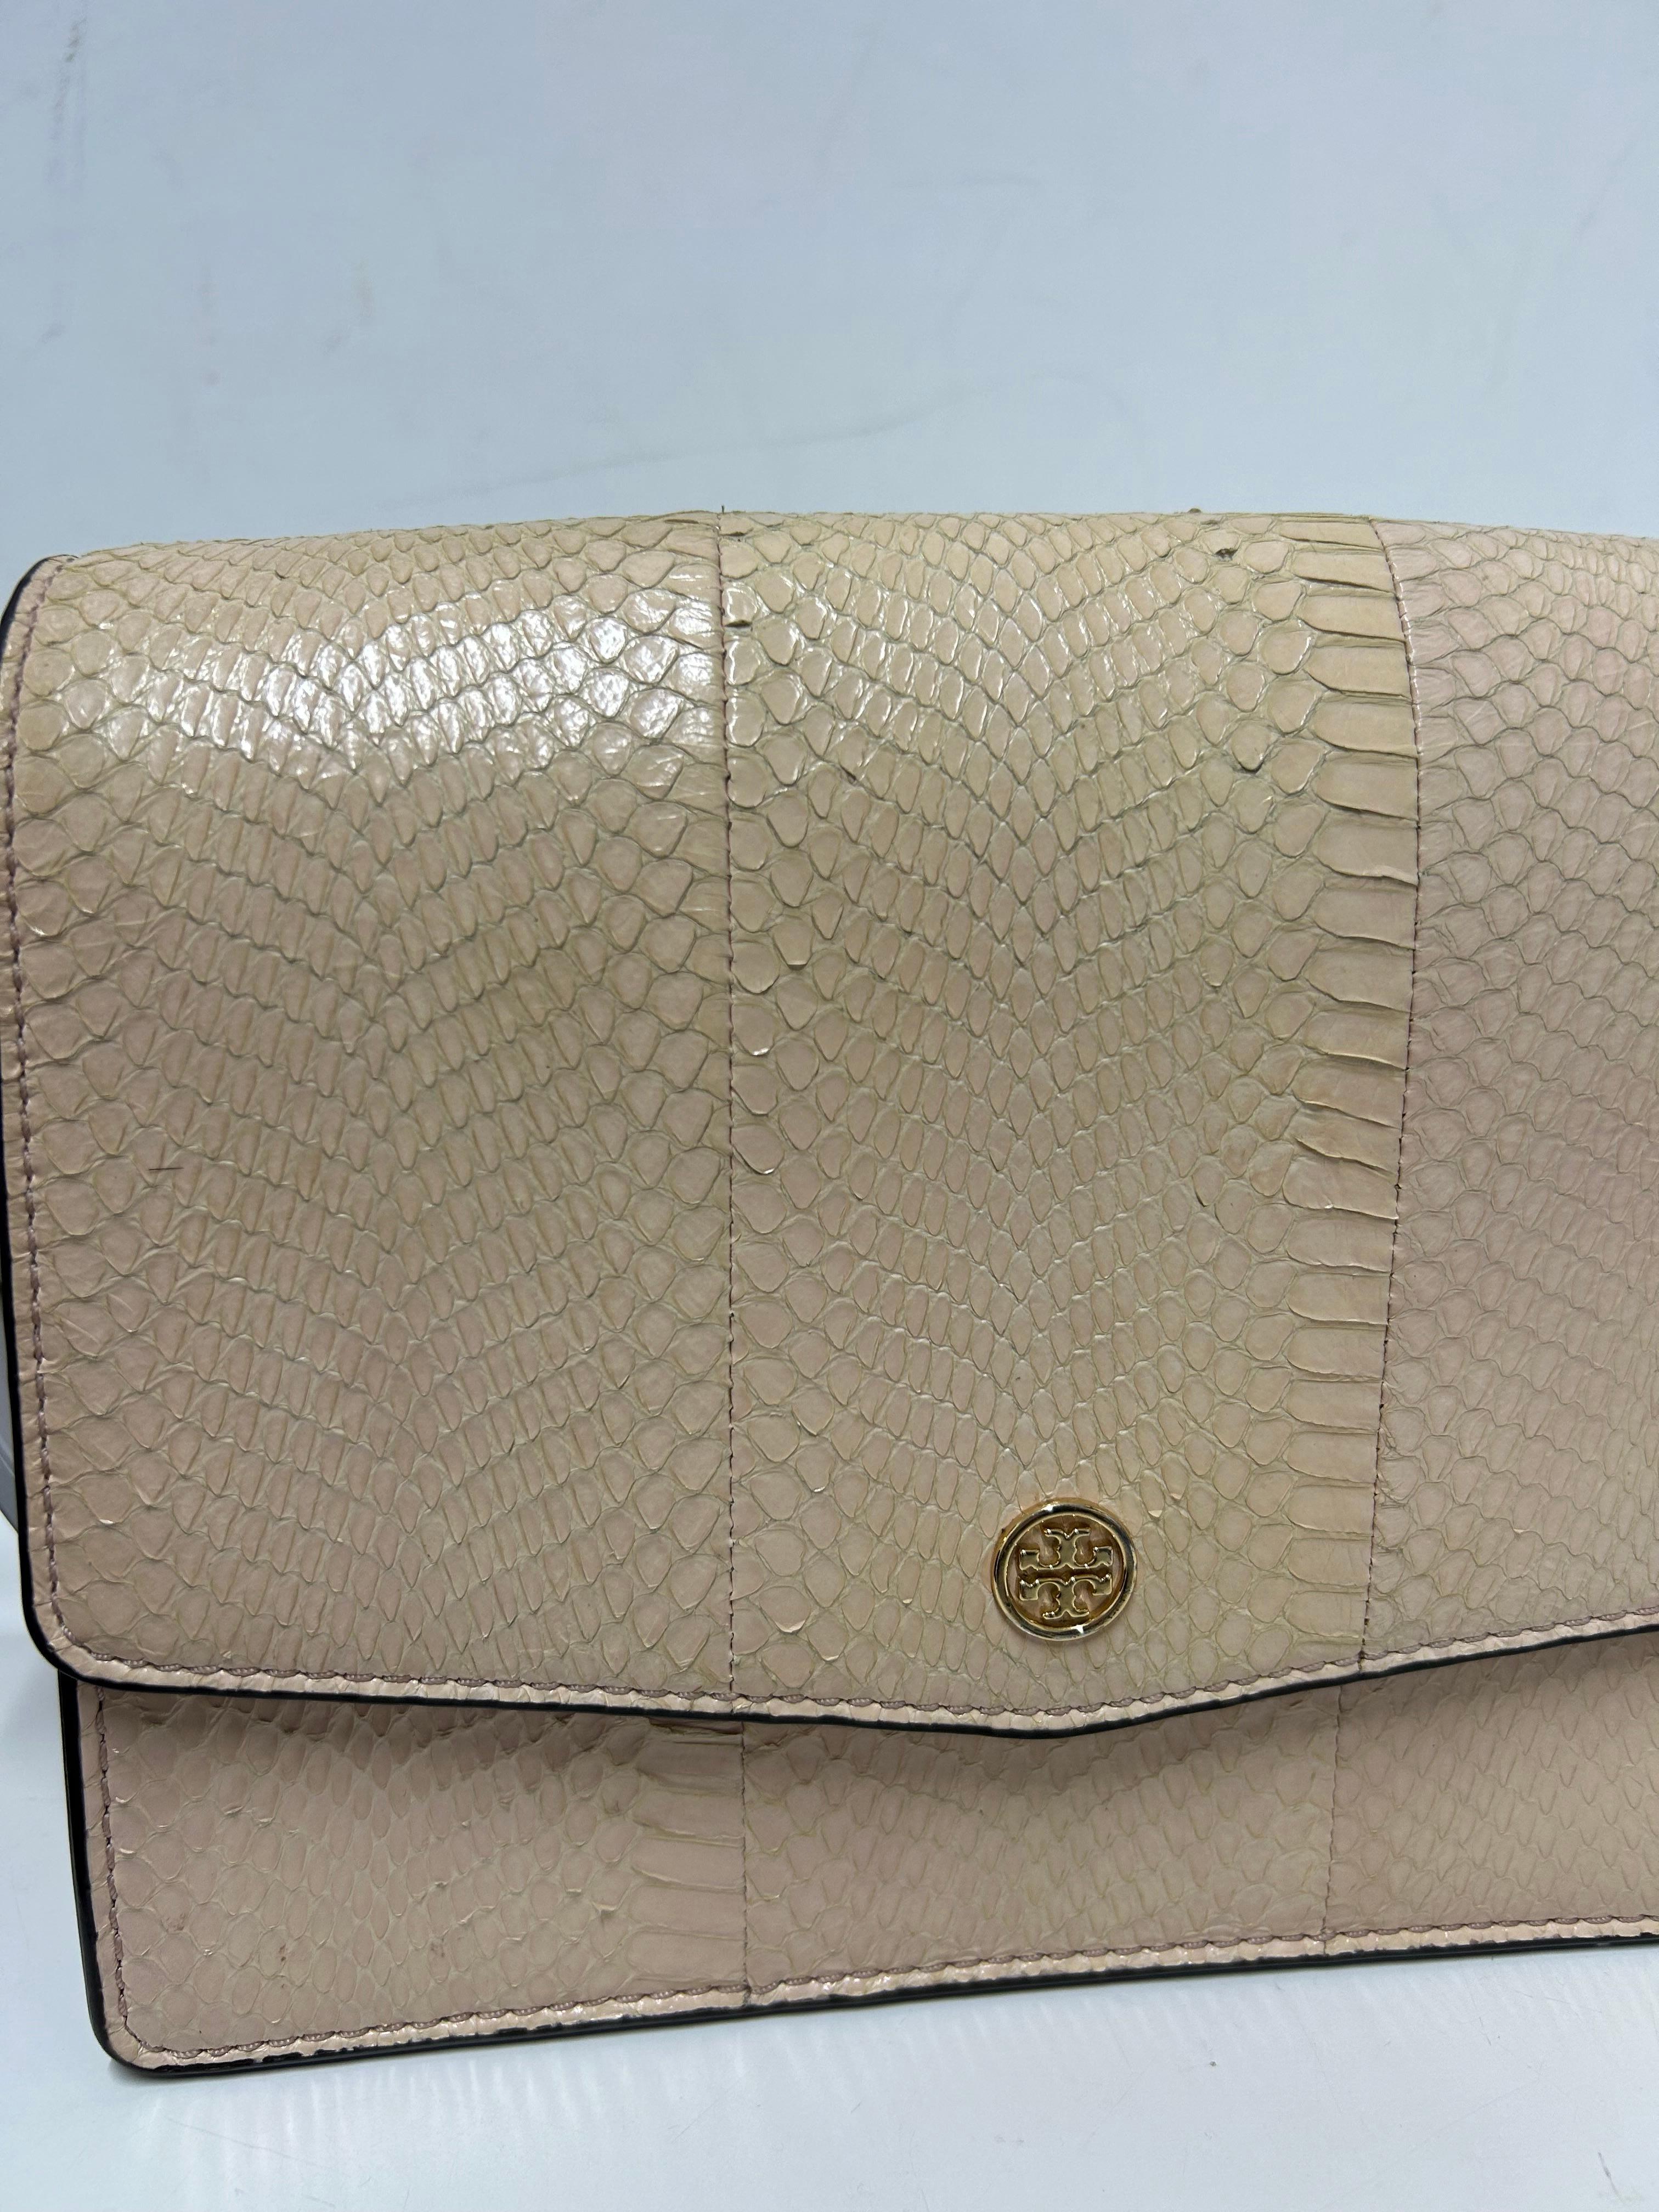 Tory Burch Robinson Convertible Shoulder Bag For Sale 3